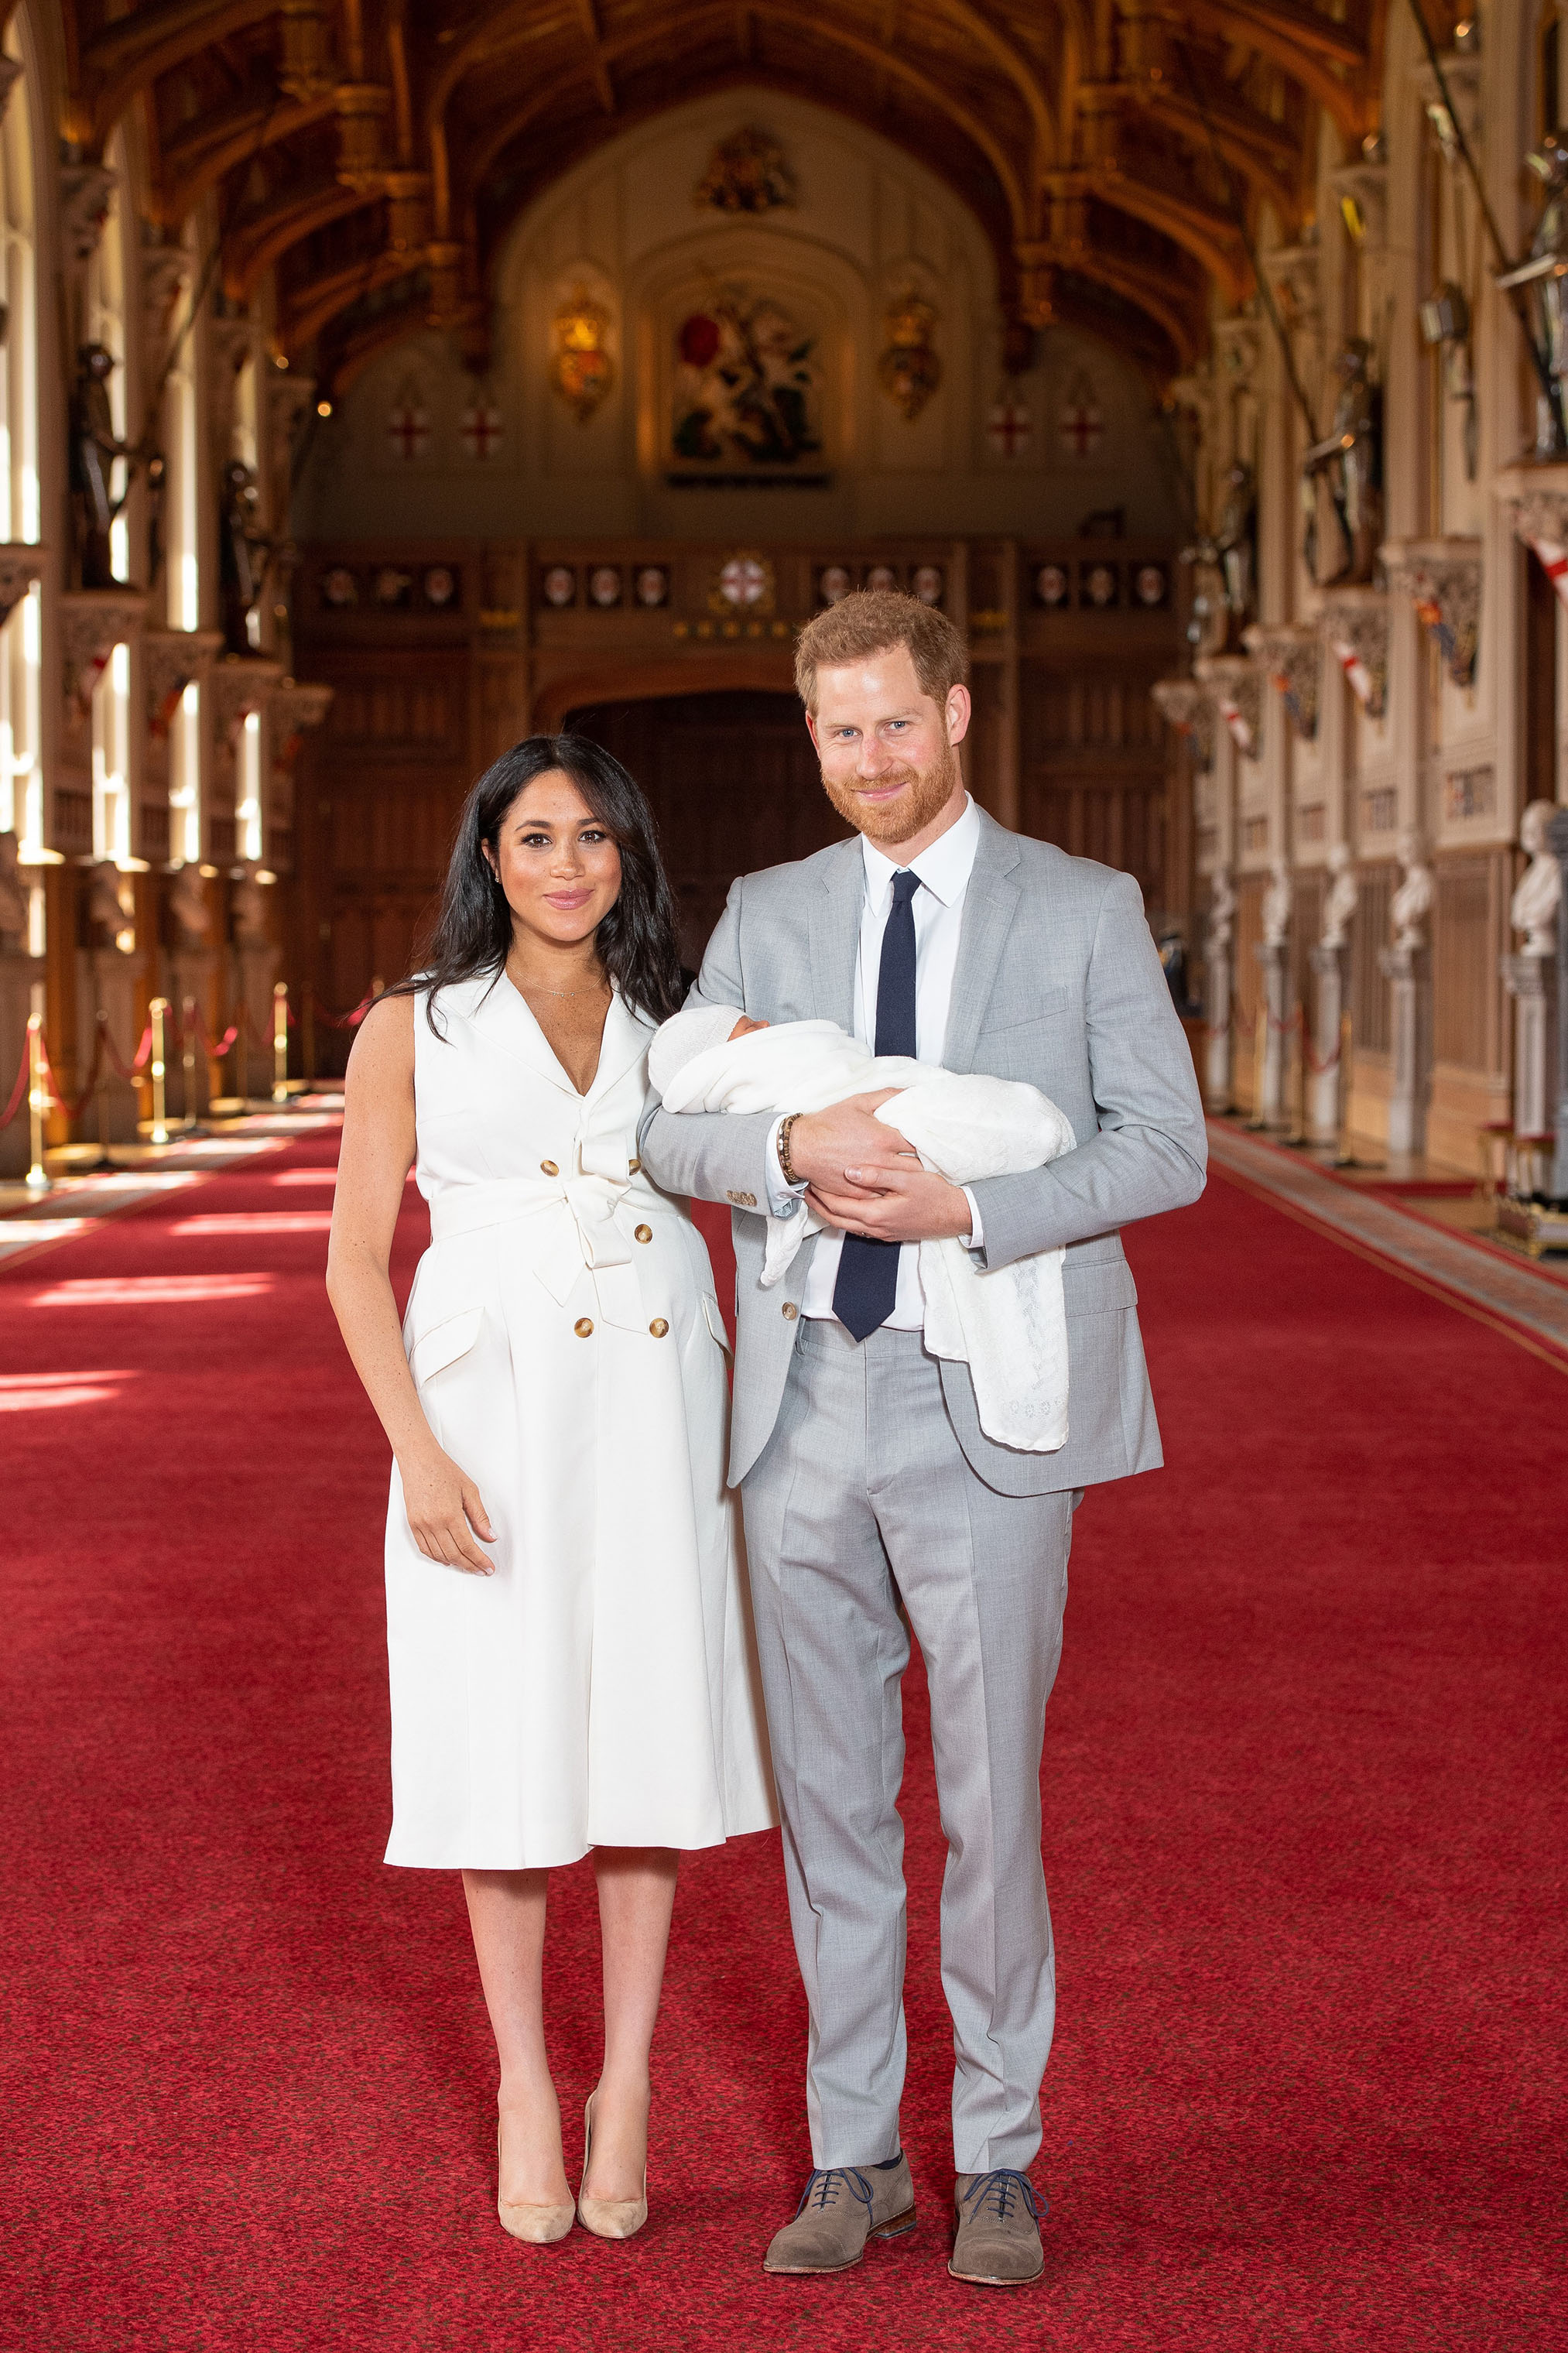 MEGHAN-MARKLE-ROYAL-BABY-SUSSEX